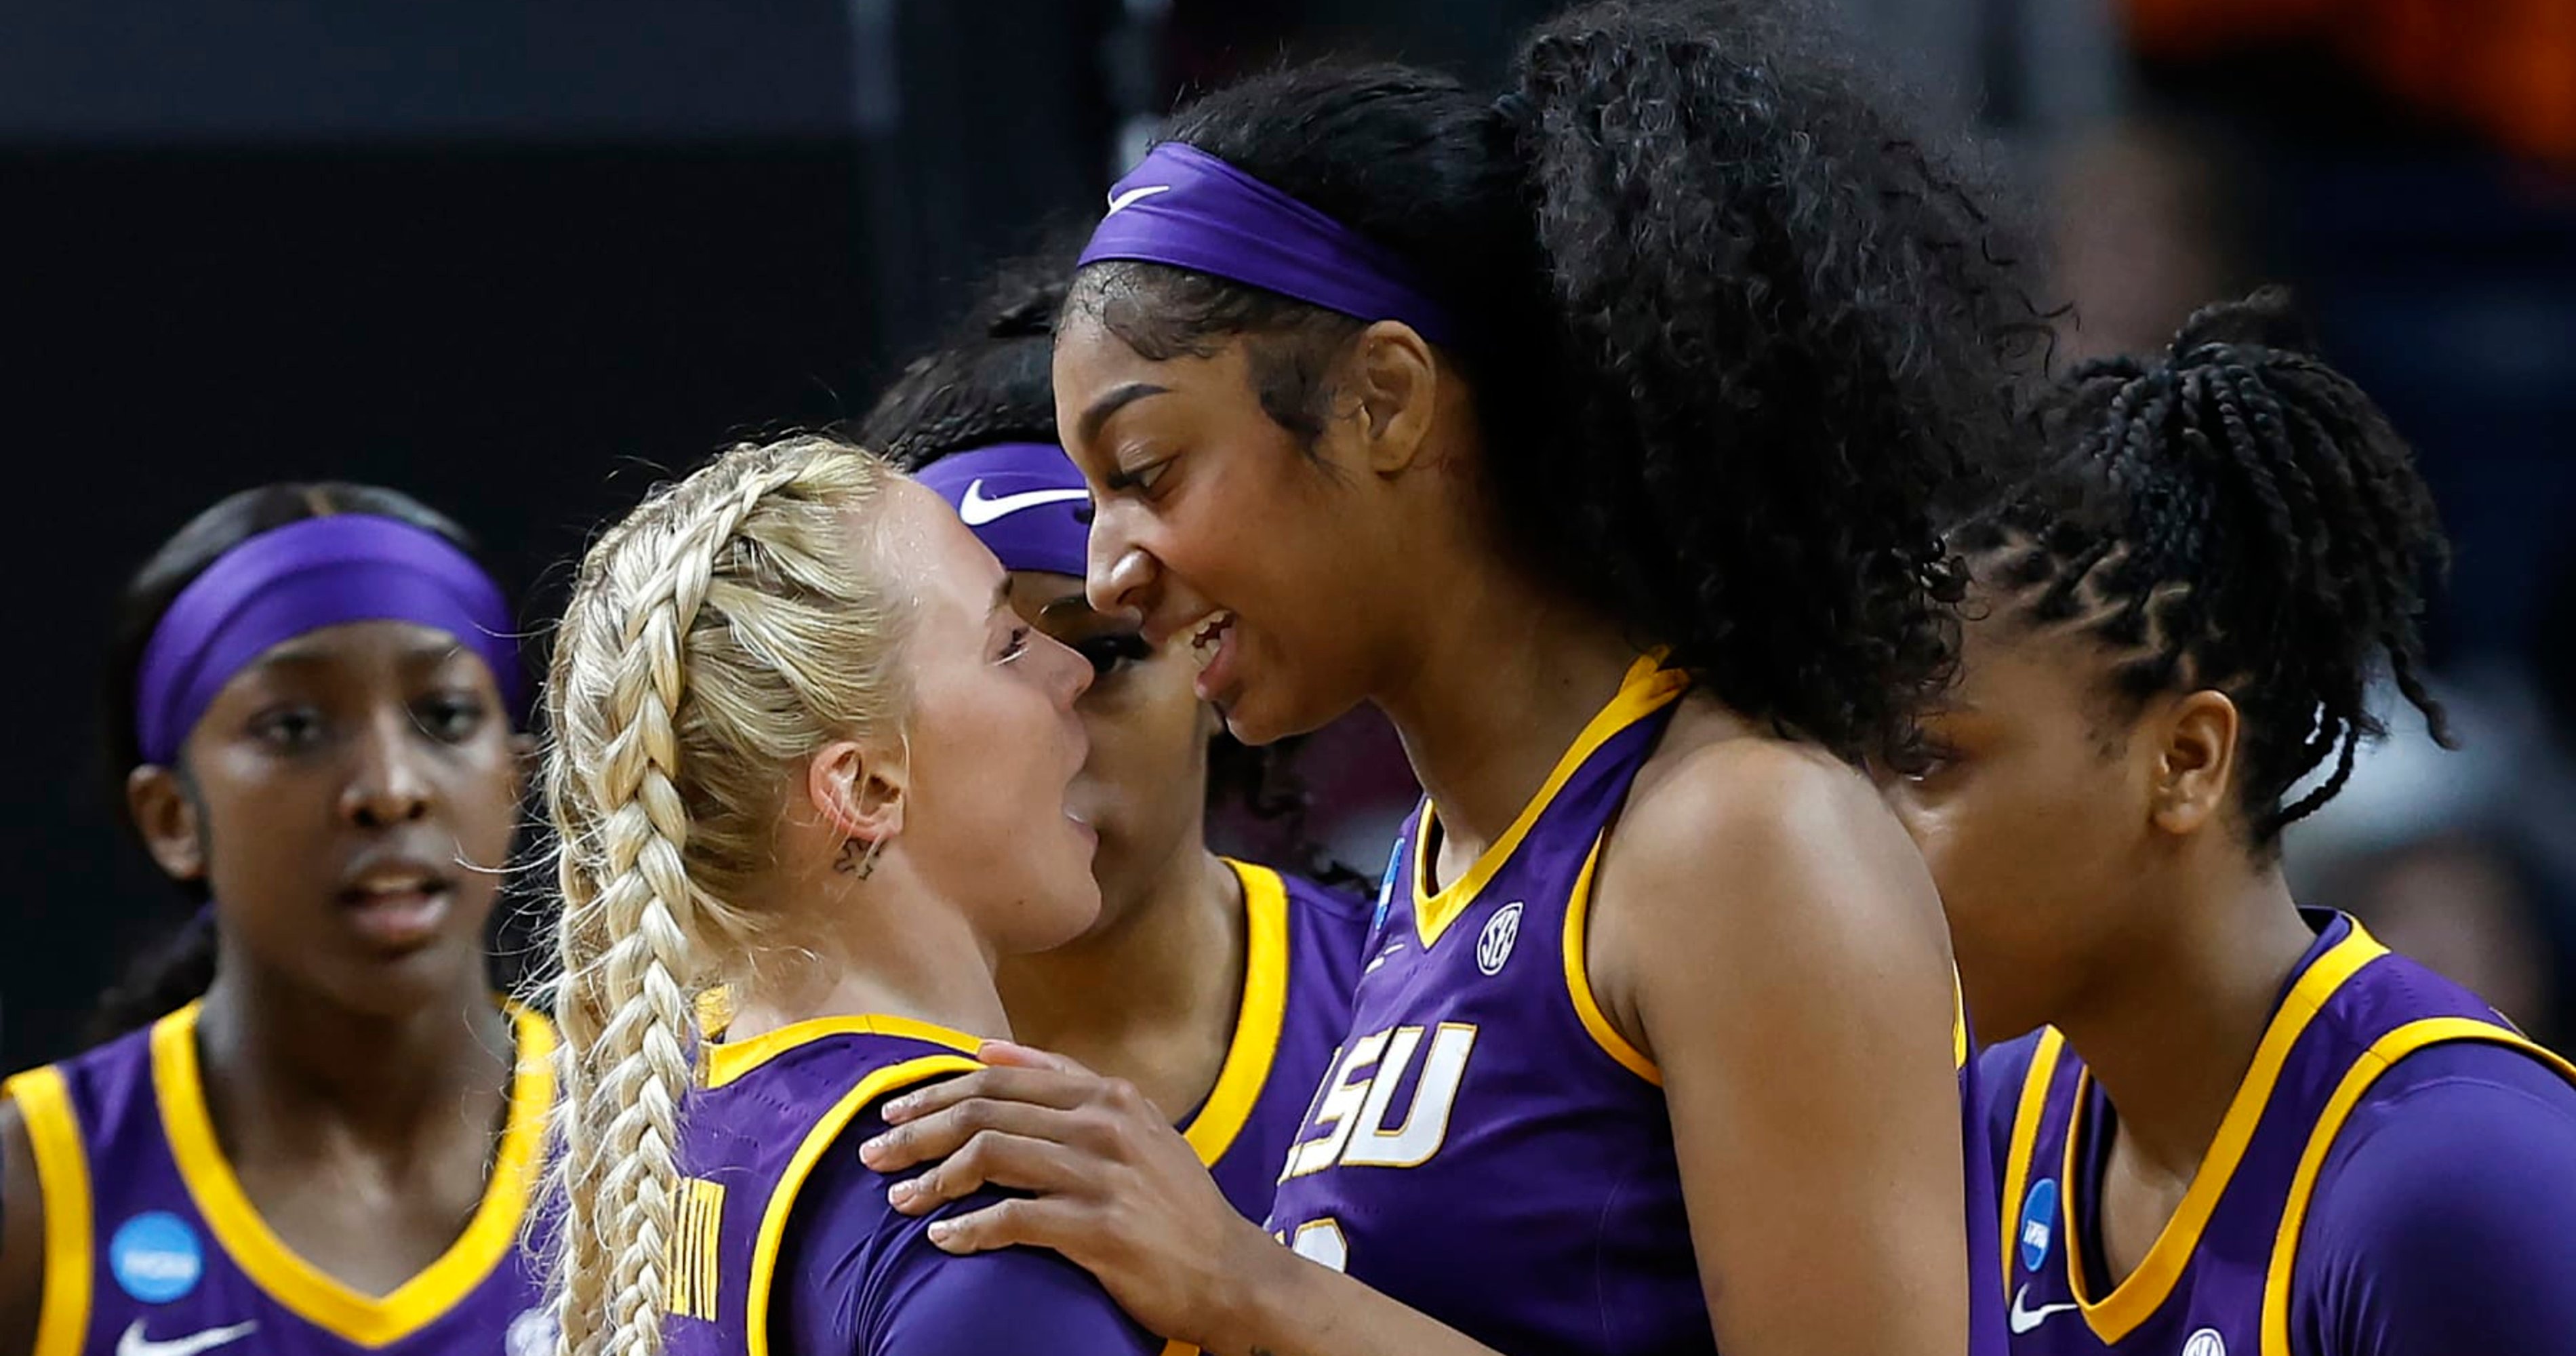 Angel Reese Hypes Former LSU Teammate Hailey Van Lith for USA 3x3 Olympic Selection